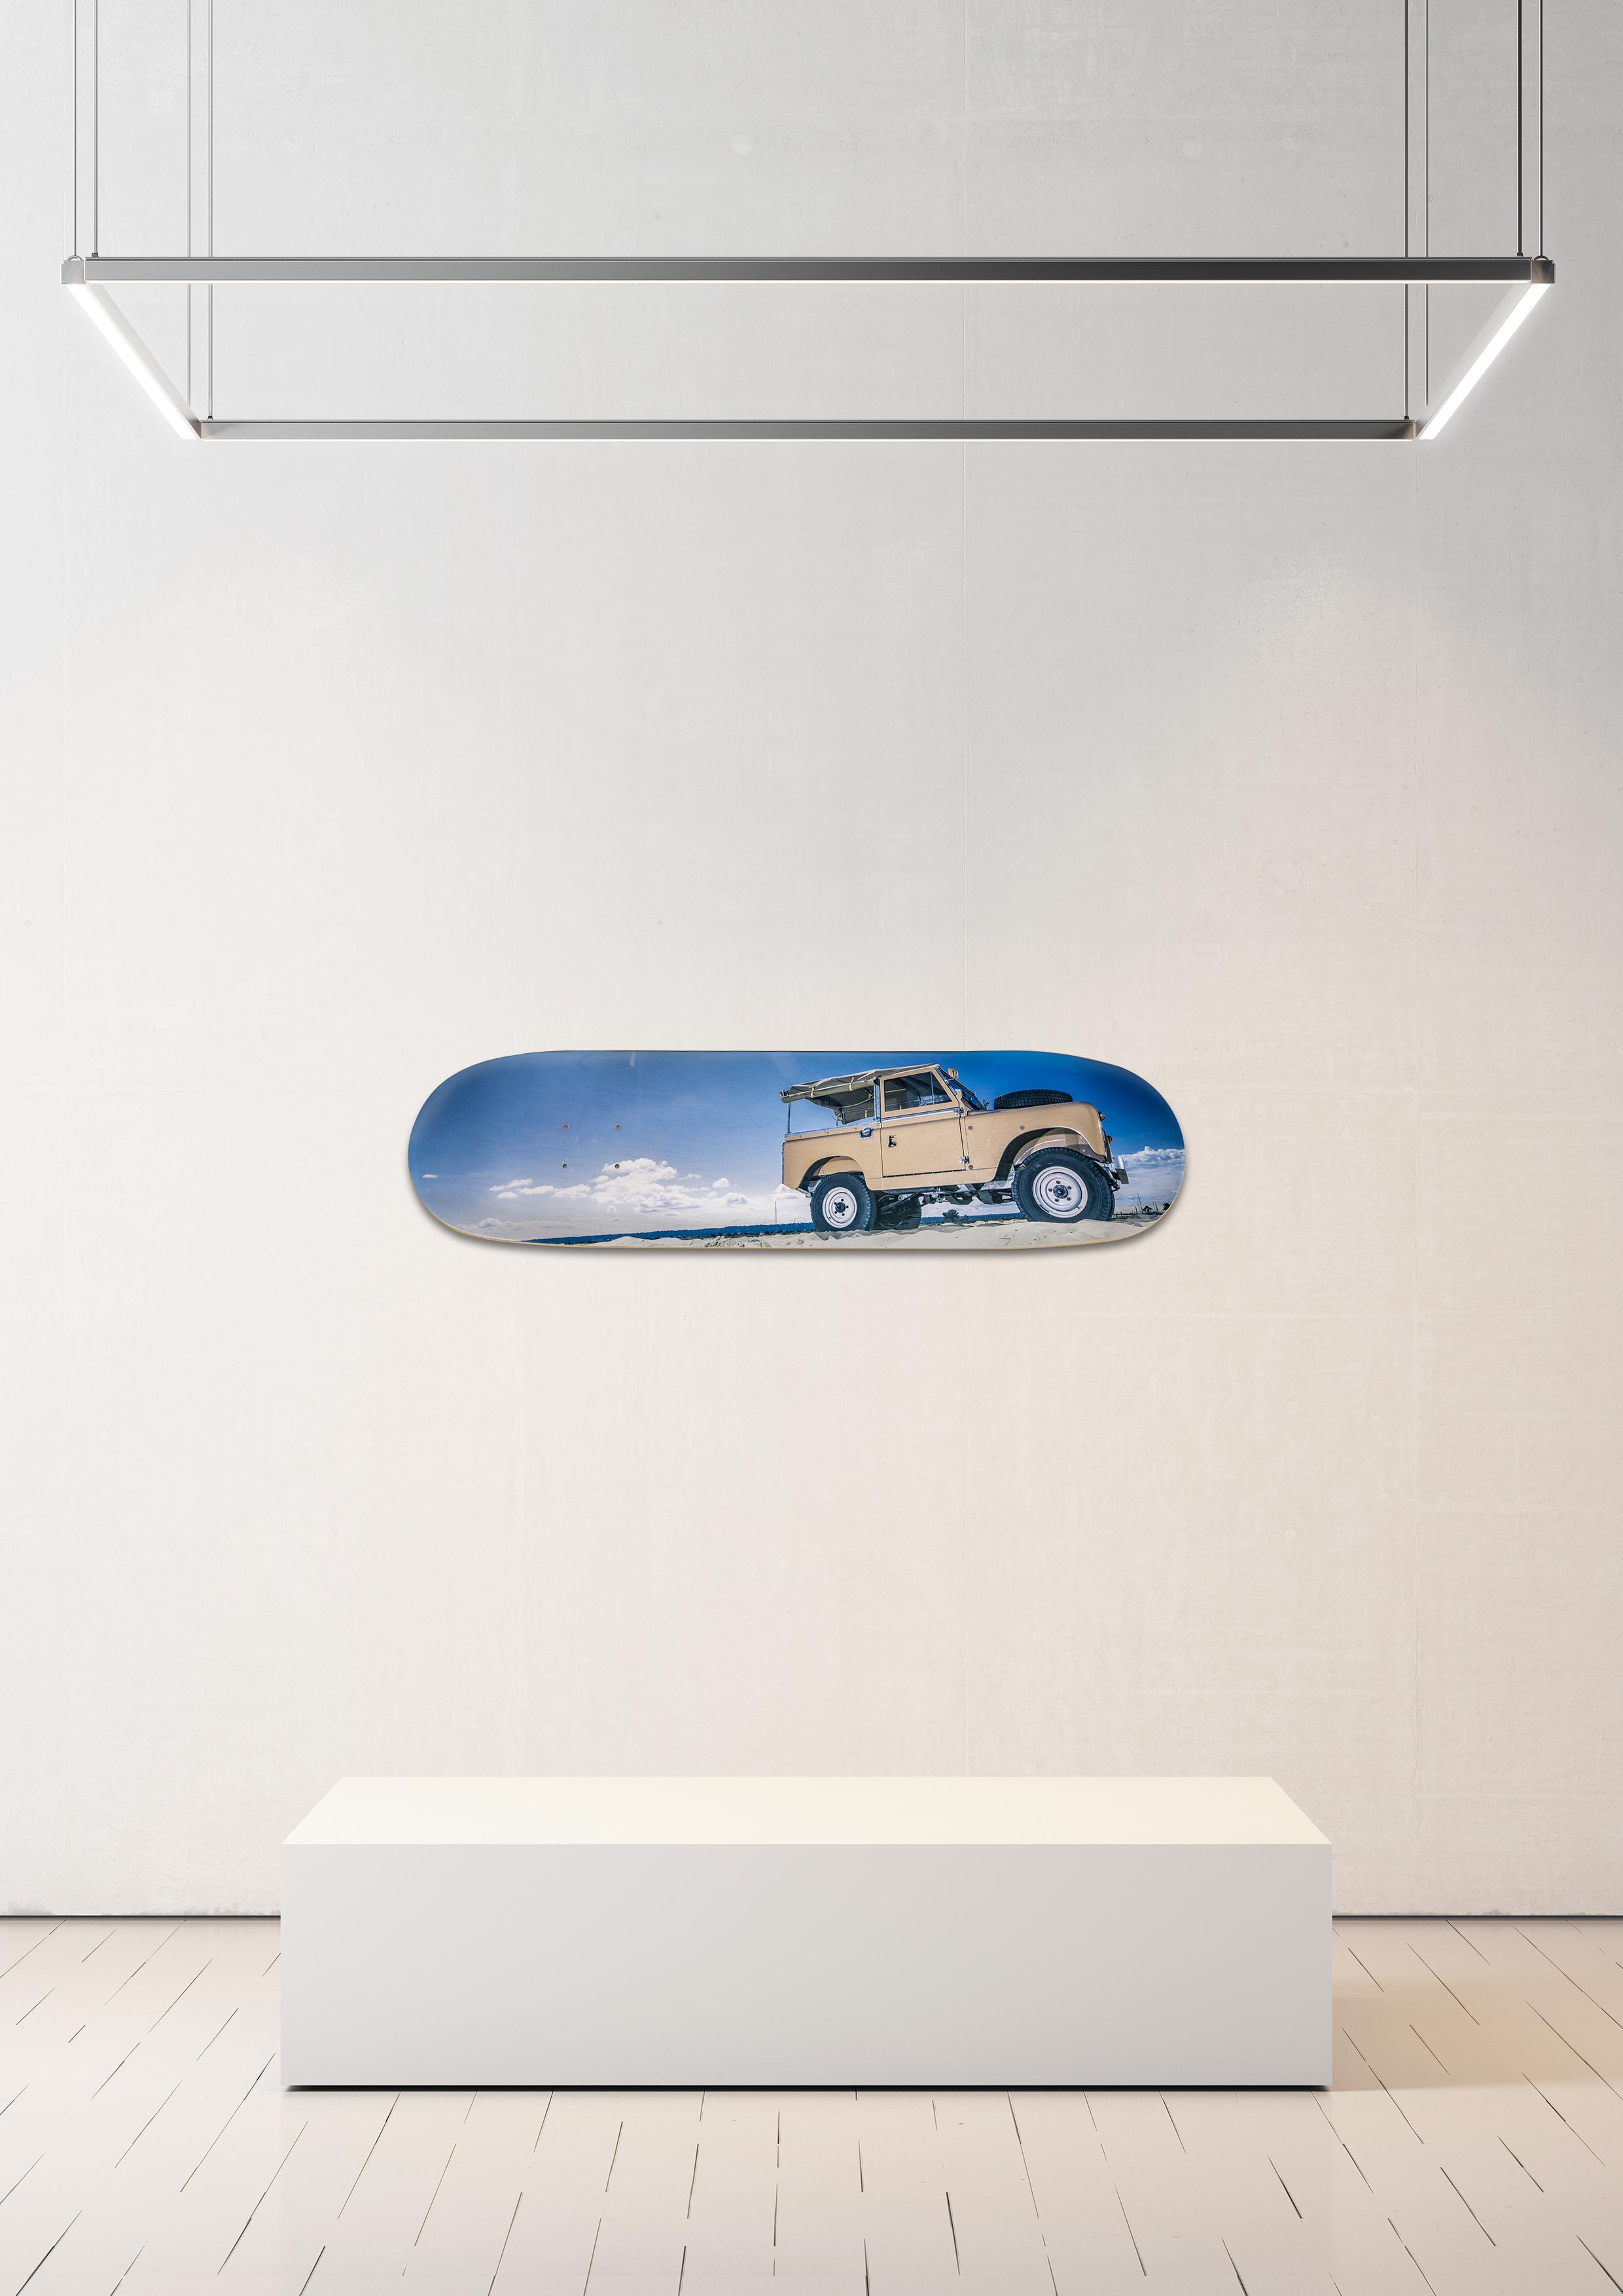 Wall skate board - very limited edition Land Rover Serie II - Serge Heitz